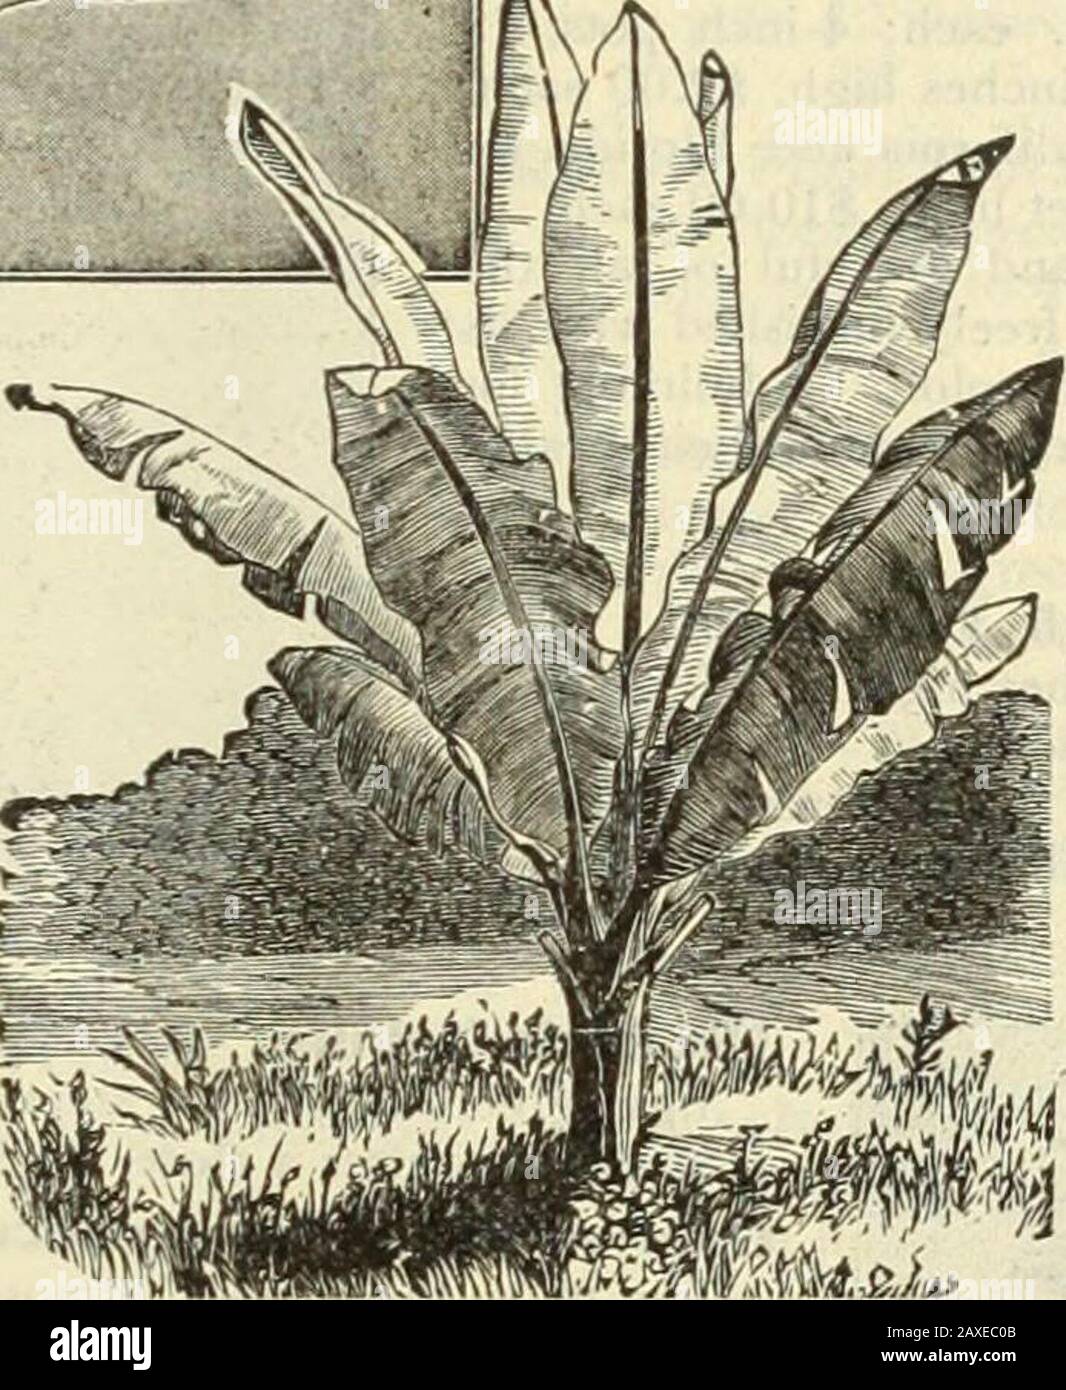 Dreer's garden book : seventy-fourth annual edition 1912 . {Abyssinian Banana). Thegrandest of all Bananas; the leaves aremagnificent, long, broad and massive; ofbeautiful green, with a broad, crimsonmidrib; the plant grows luxuriantly from8 tol2 feet high. During the hot summer,when planted out, it grows rapidly andattains gigantic proportions, producing atopical effect on the lawn or flower gar-den. (See cut.) Good plants, 30 cts.each; strong plants in 5-inch pots, 50 cts.each; 7-inch pots, $1.00 to $1.50 each. MusA Enskte. NASTURTIUMS. Tom Thumb or Dwarf. Too well known to need description. Stock Photo